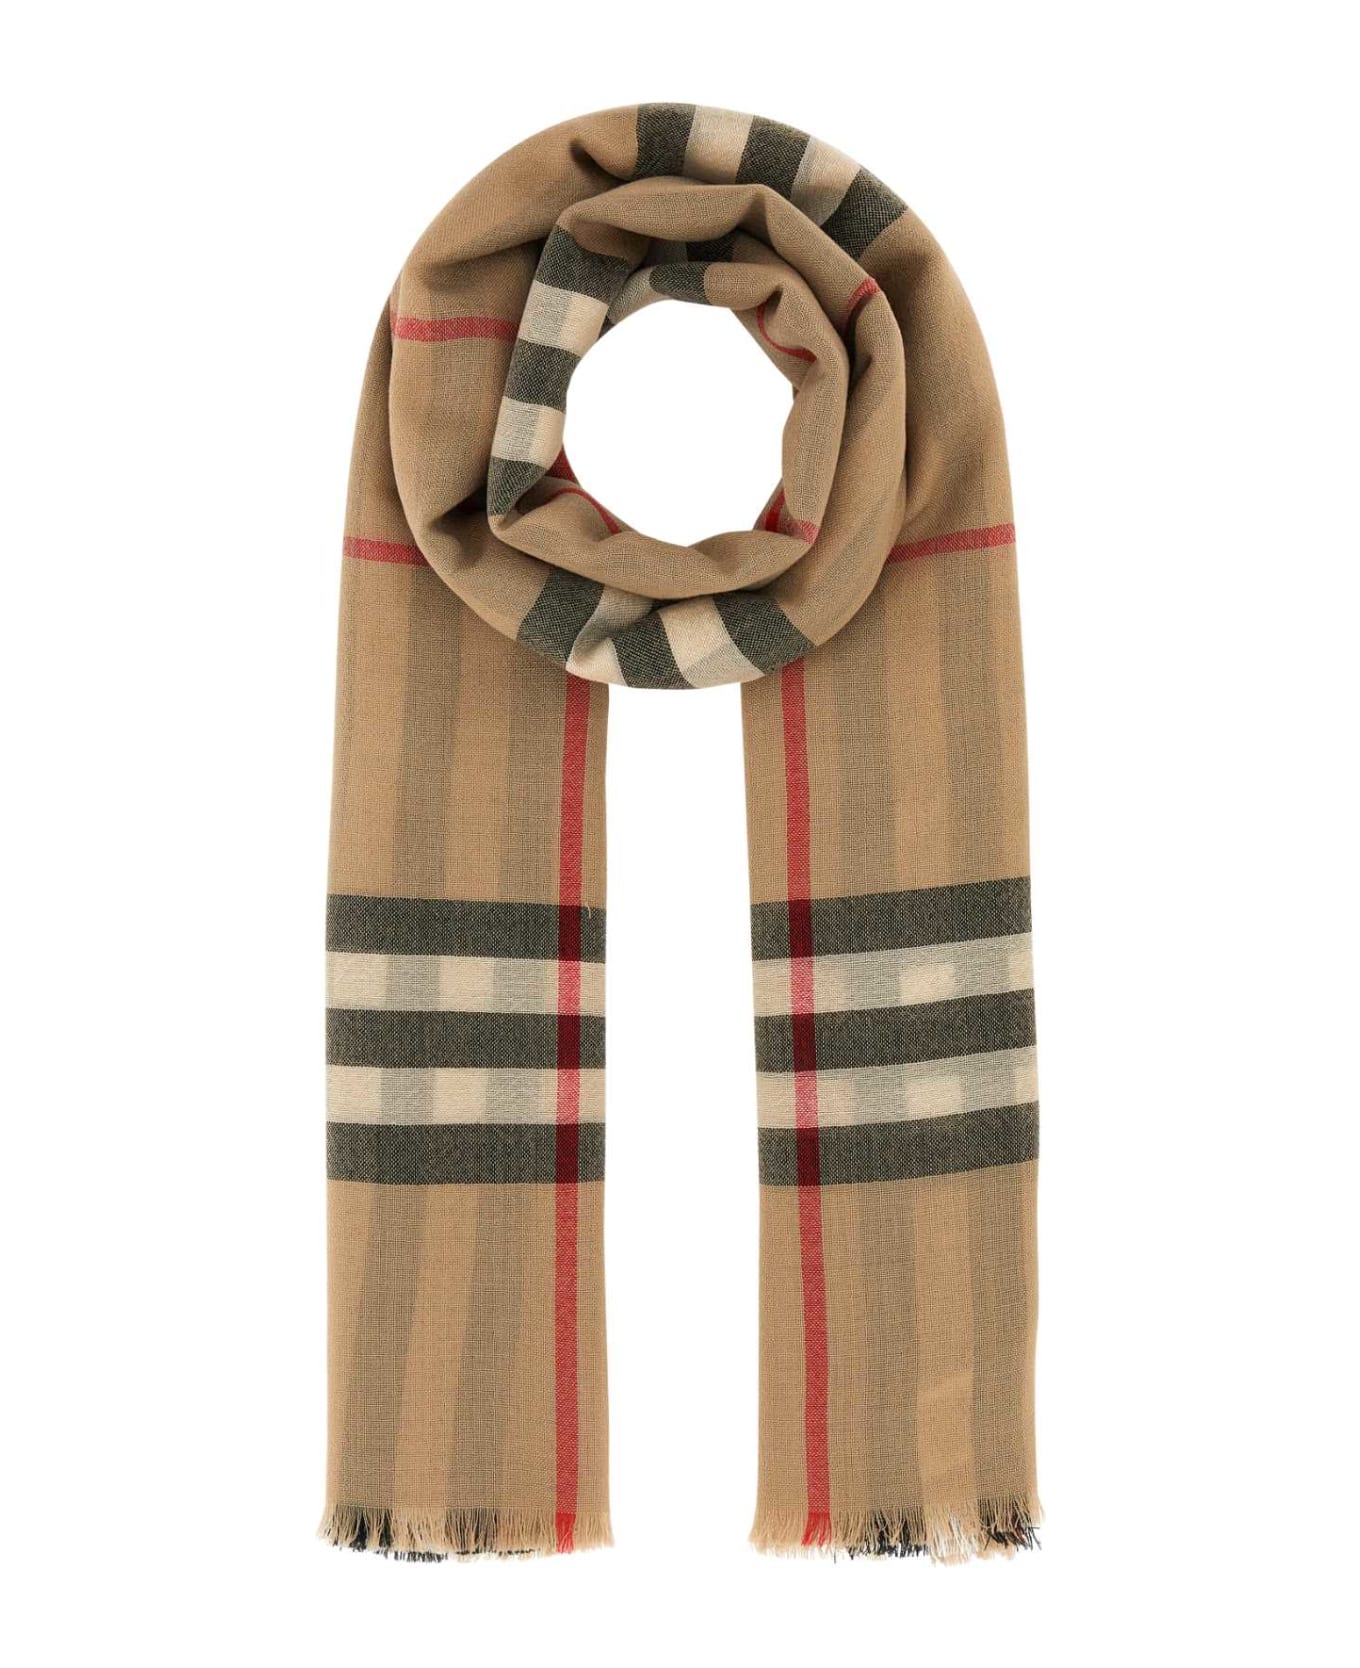 Burberry Embroidered Wool Scarf - ARCHIVEBEIGE